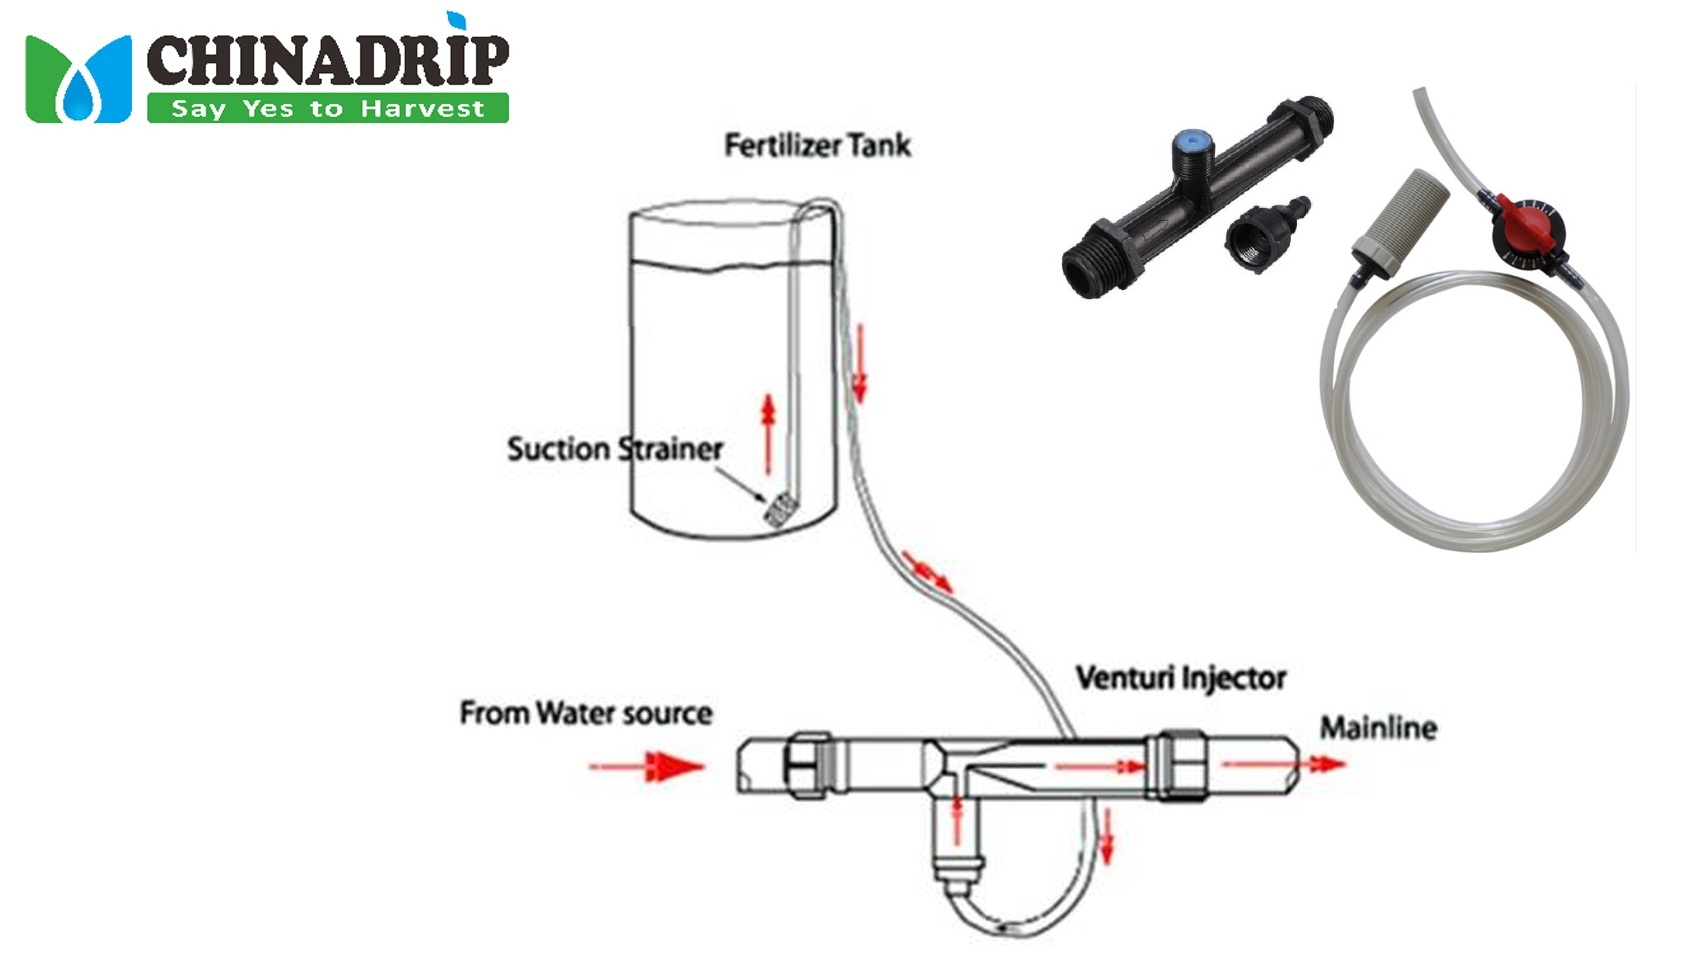 How to work a Venturi injector?